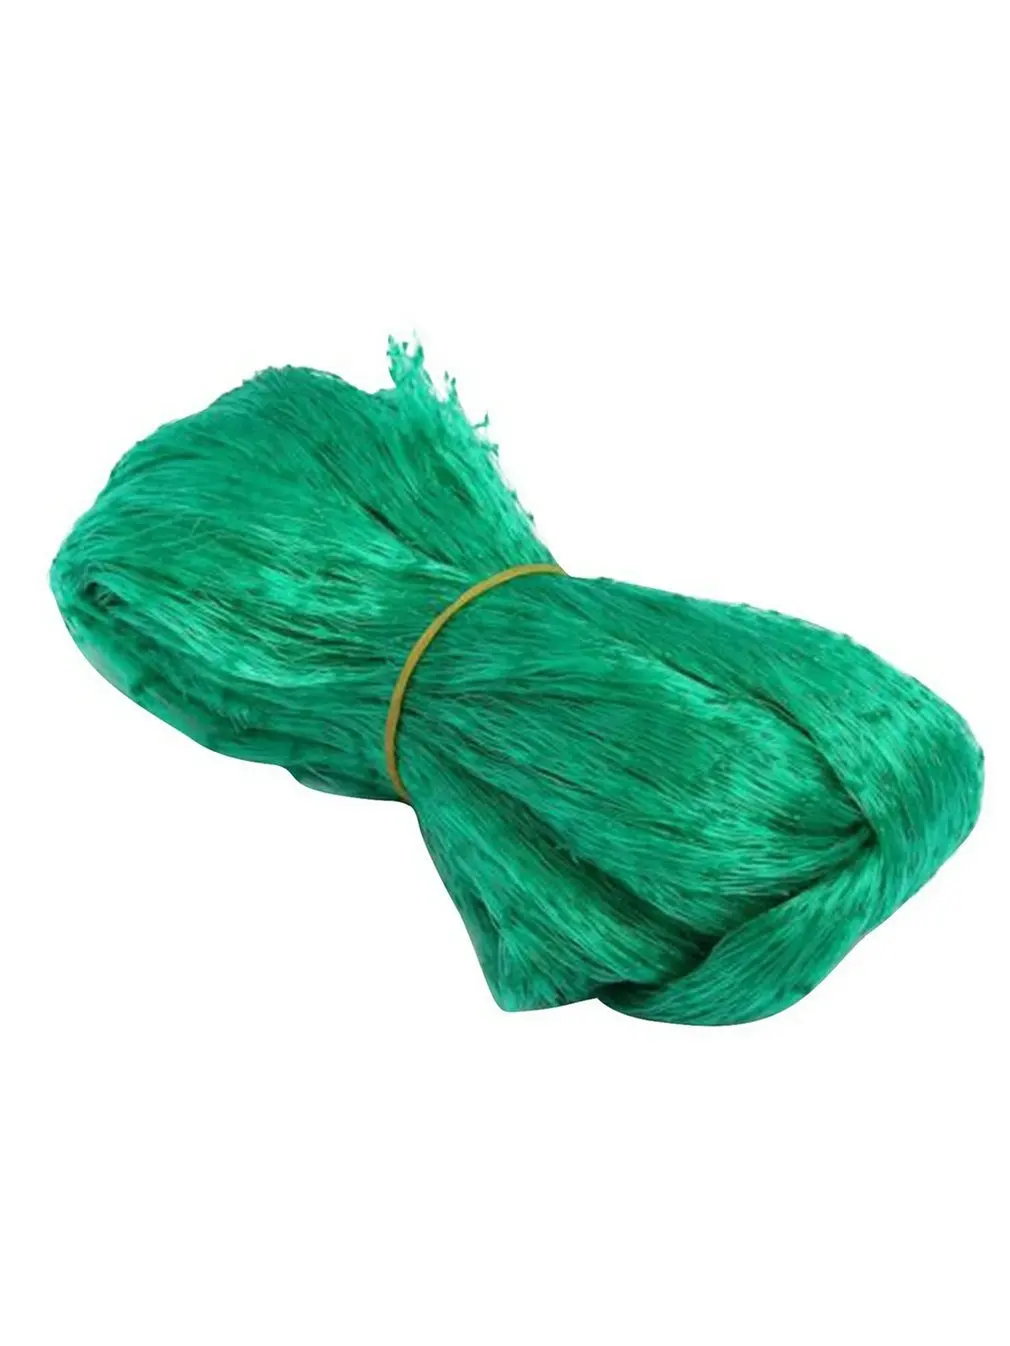 

4size Anti-bird Netting Green Anti-bird Netting Deer Fence Pond Netting To Protect Plants Fruits Trees And Vegetables